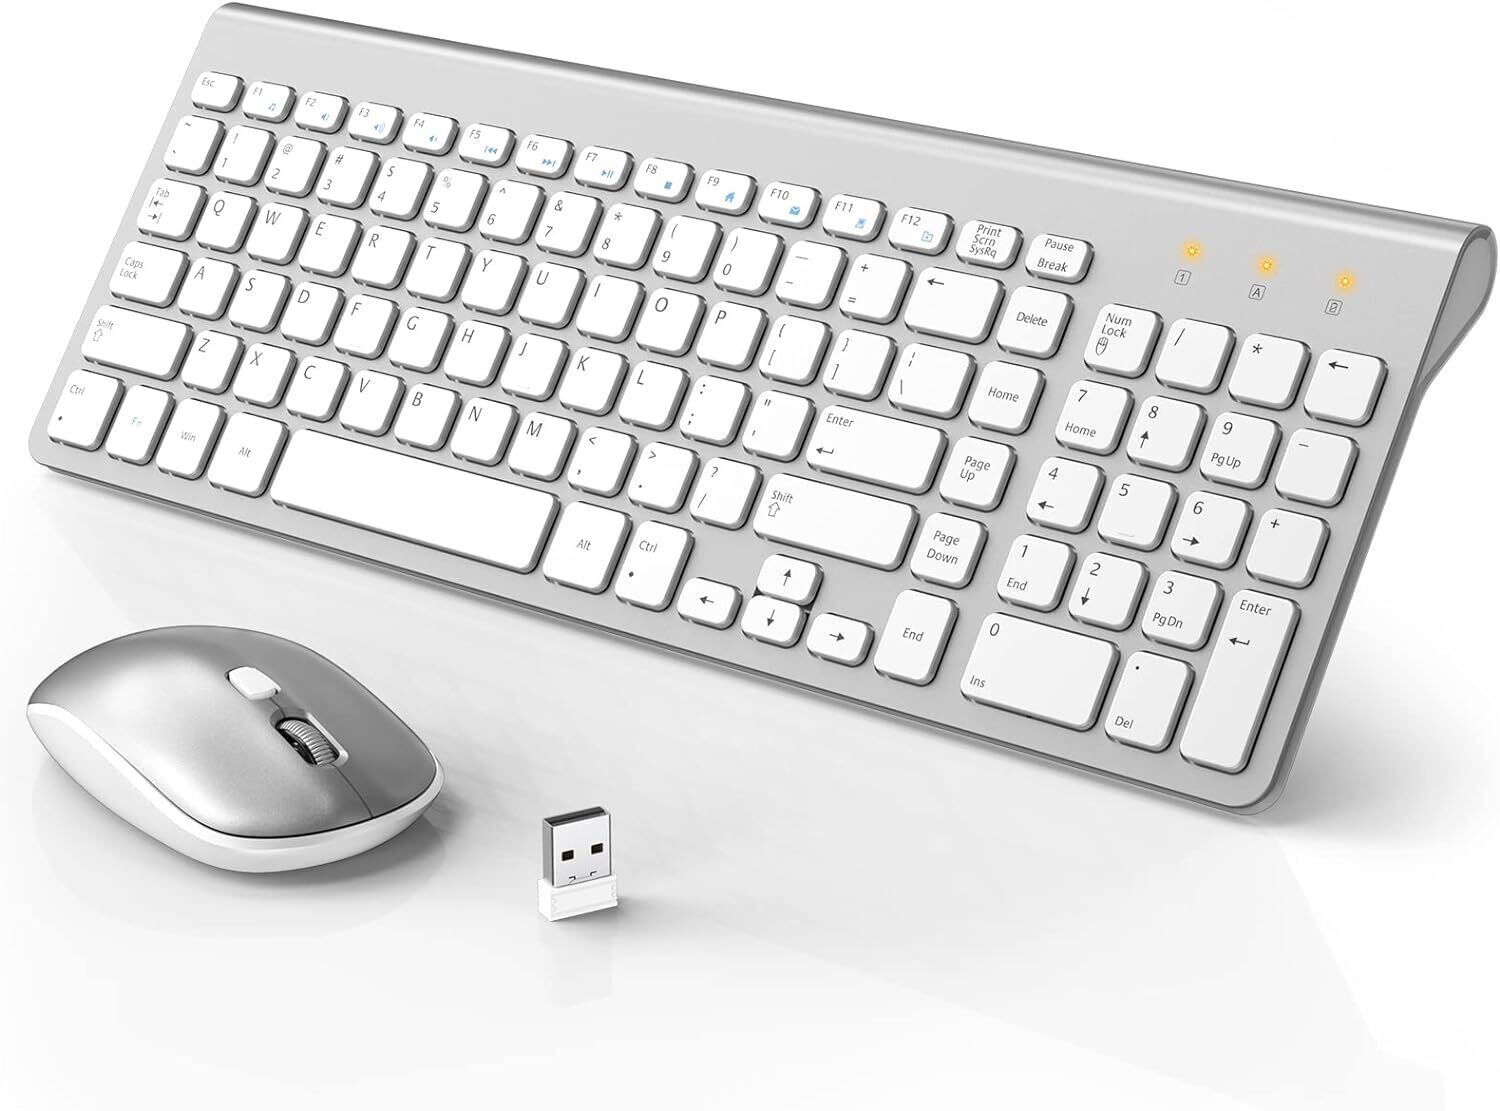 WisFox Wireless Keyboard and Mouse Combo, Ultra Slim Compact Keyboard with Silen